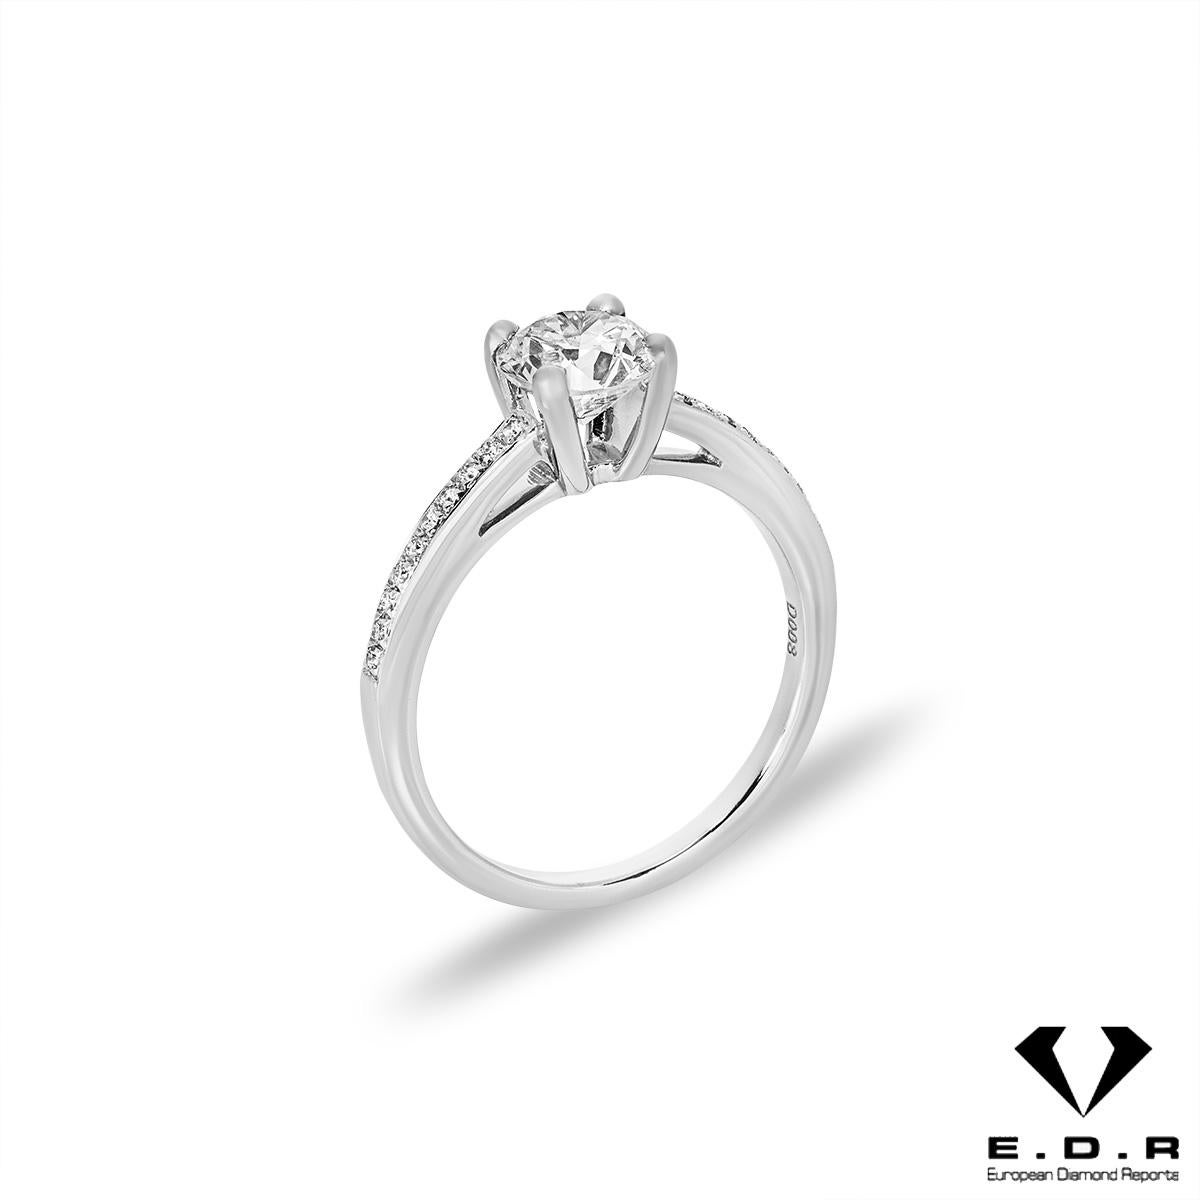 A beautiful 18k white gold diamond engagement ring. A round brilliant cut diamond weighing 1.03ct, F colour and VS1 clarity is set to the centre in a four prong mount. Further complementing the centre stone are 20 round brilliant cut diamonds pave